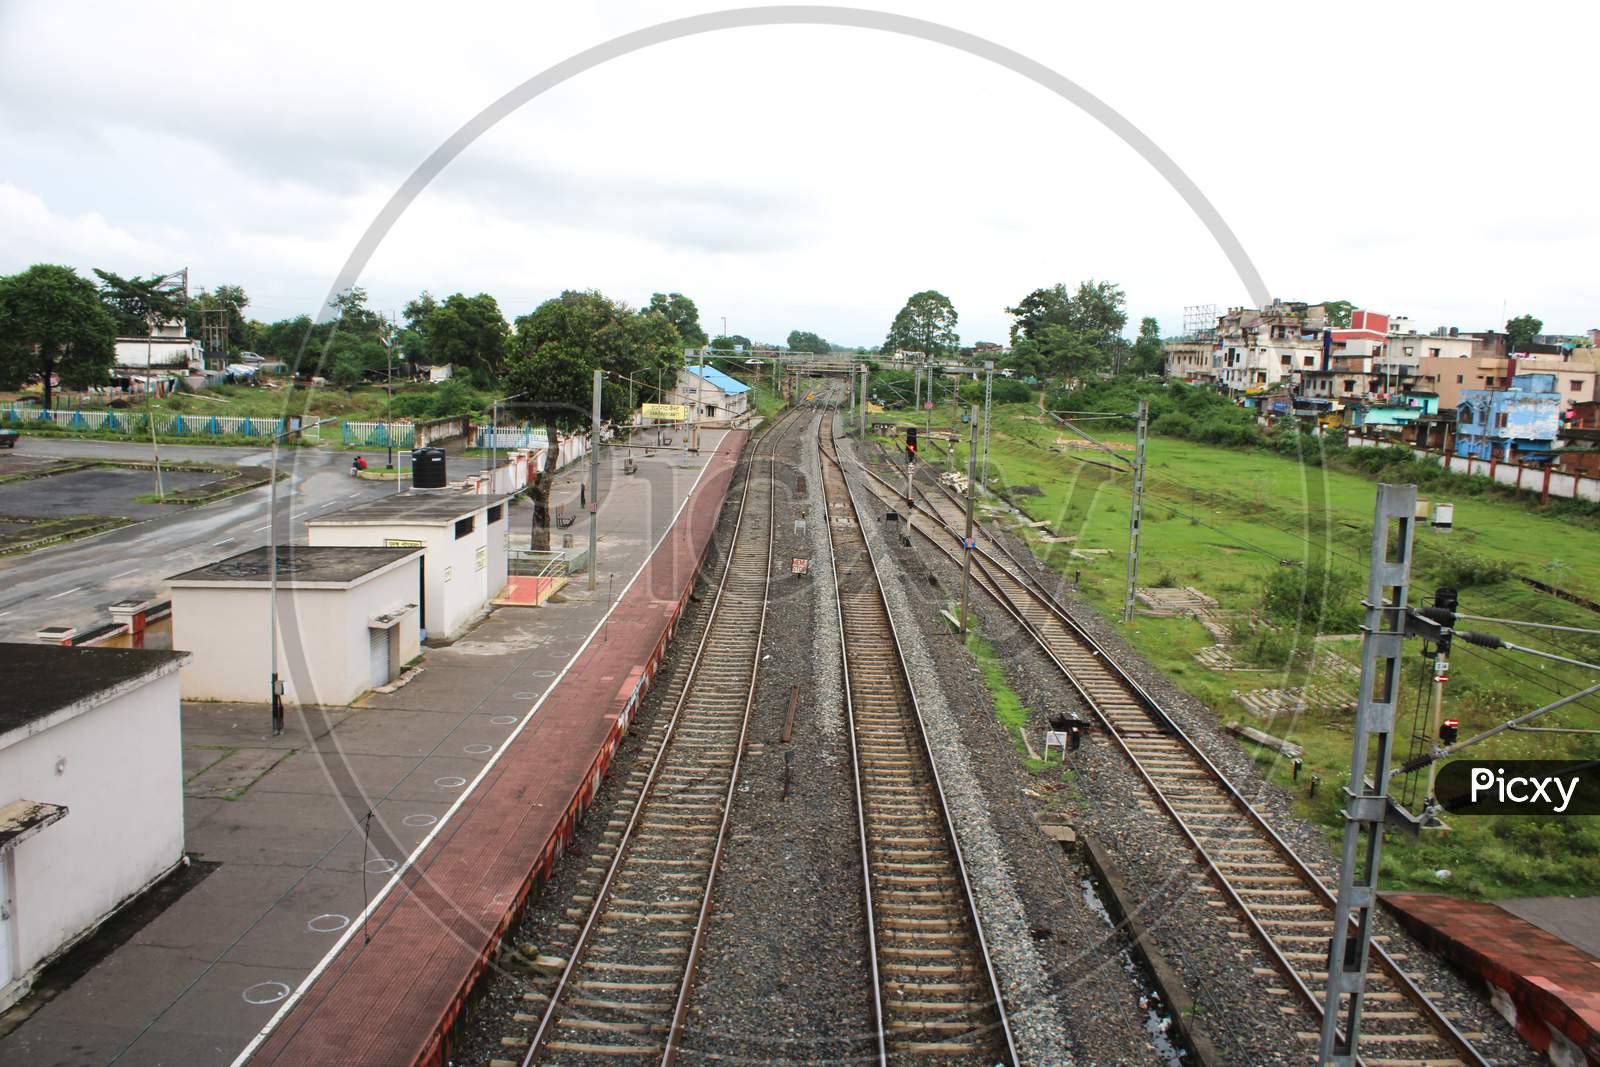 Railway track from top